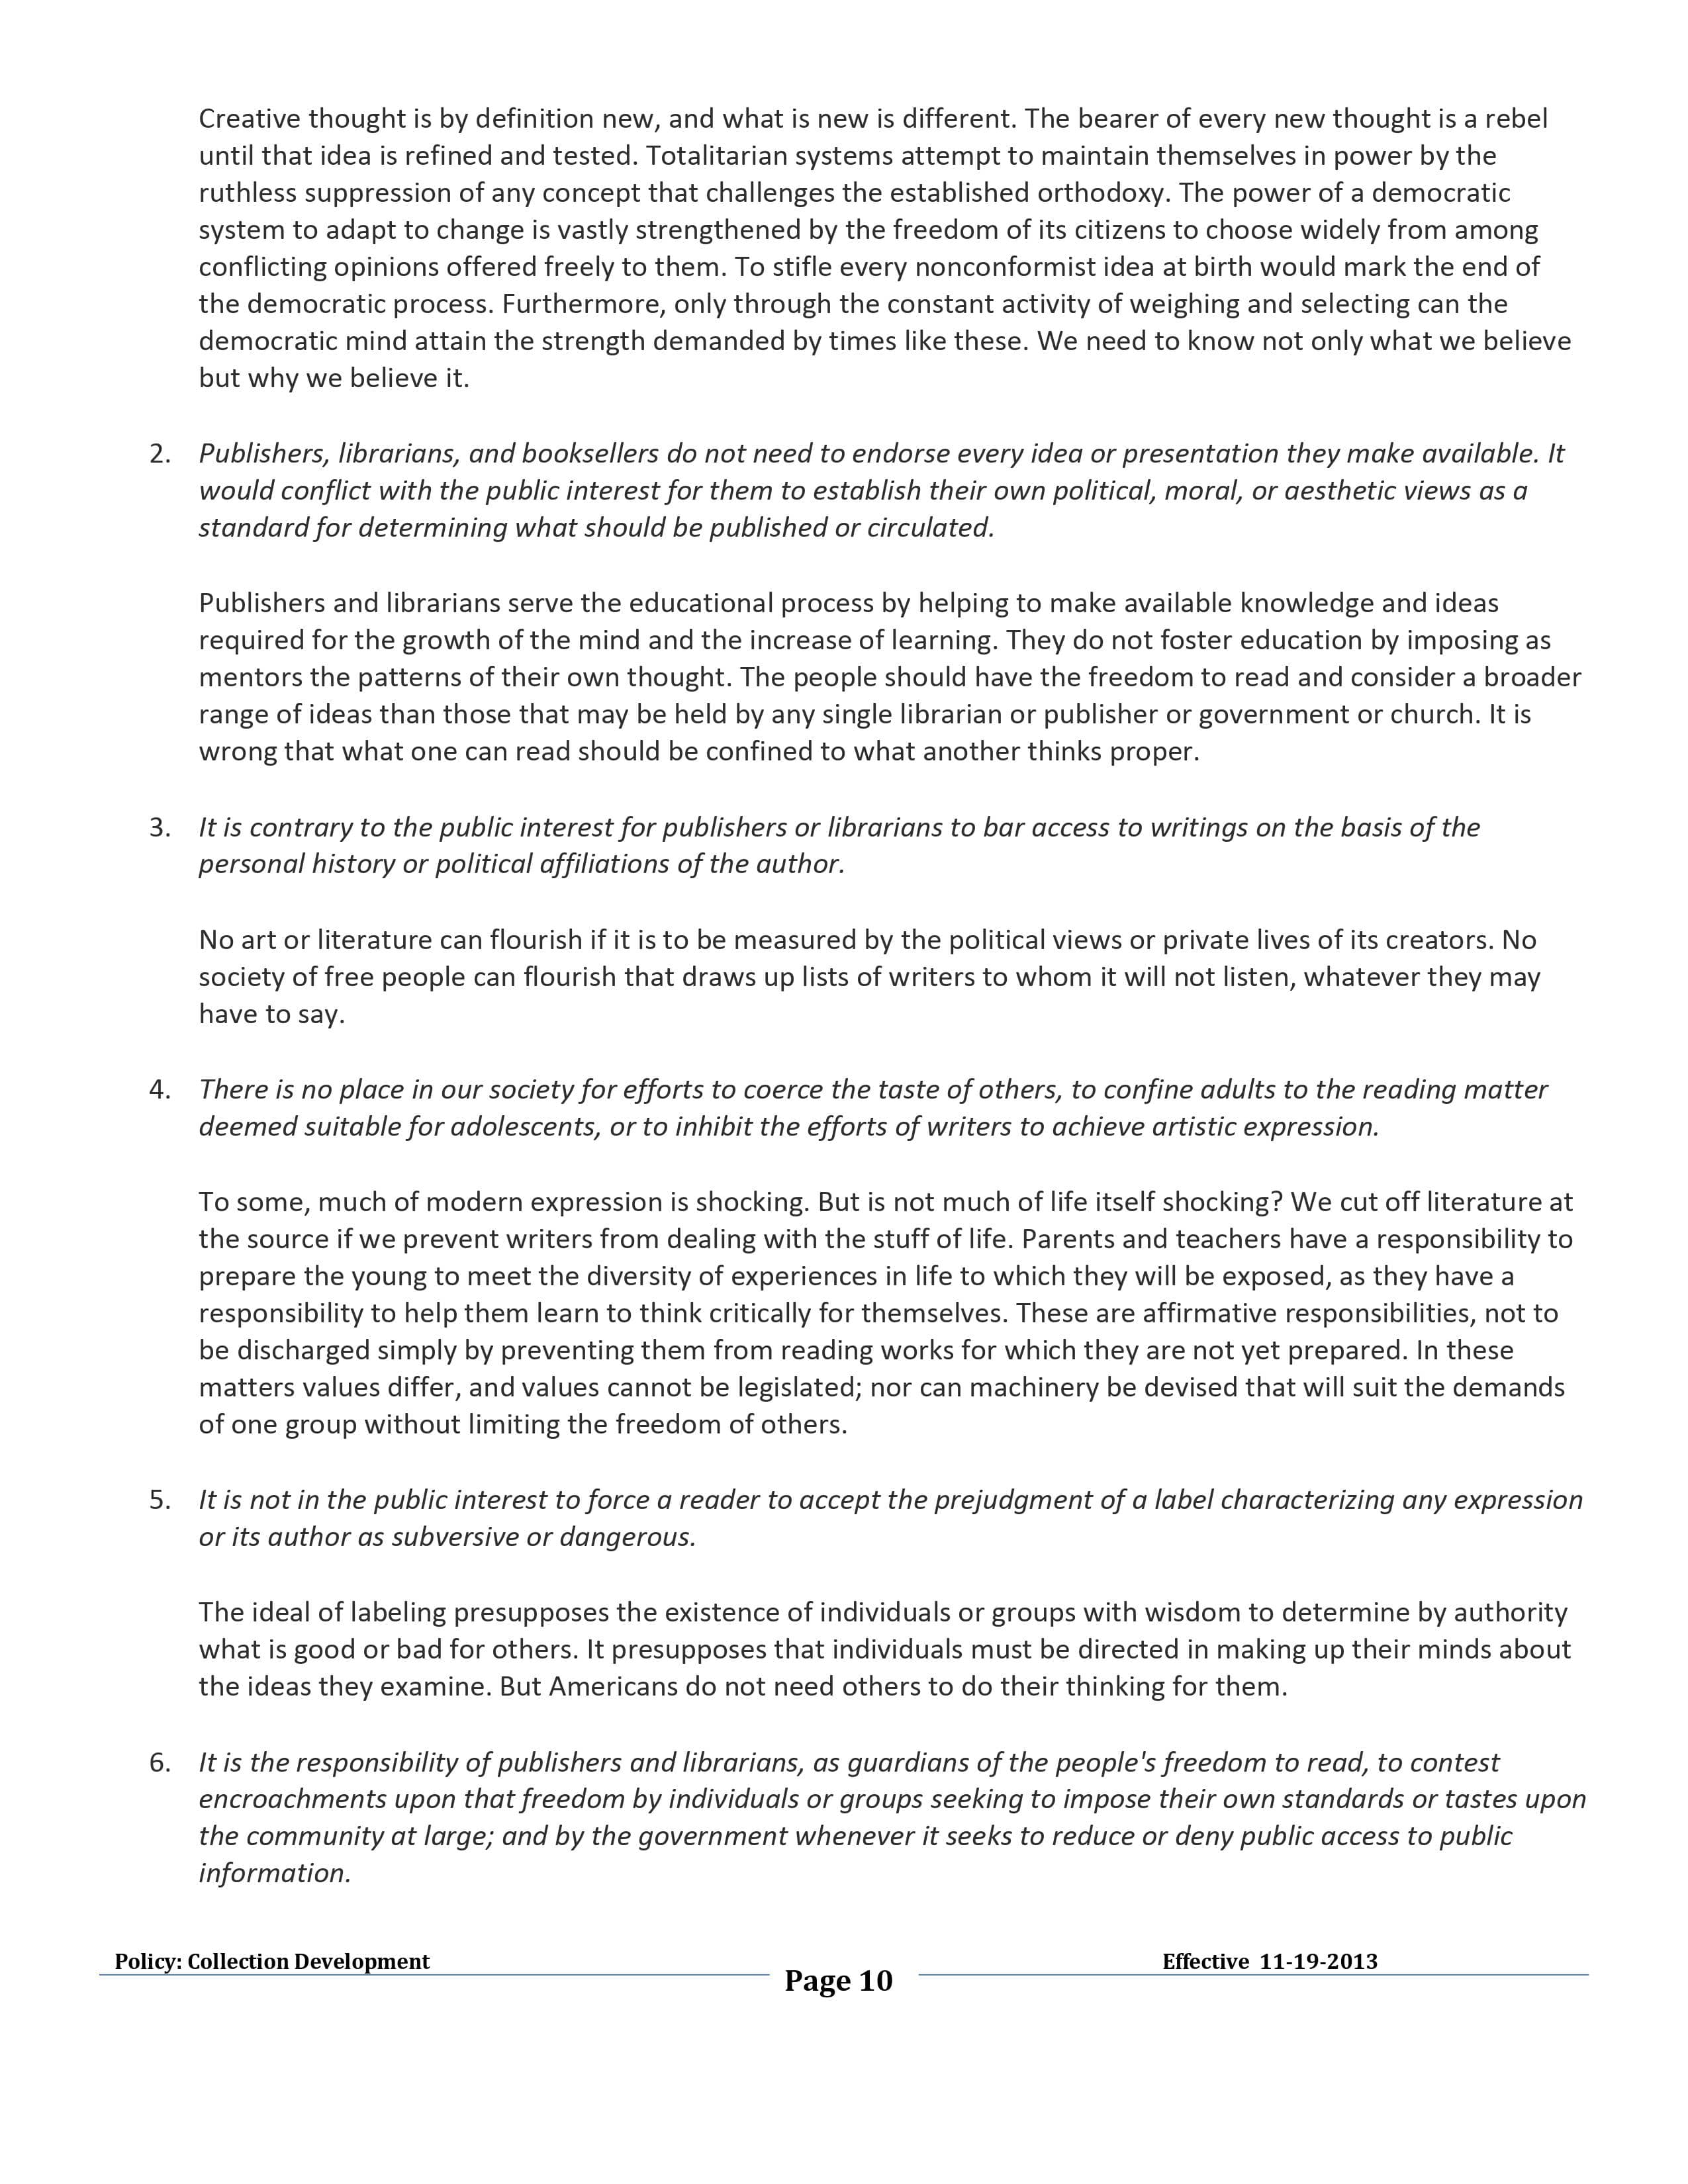 PCDL Collection Development Policy Page 10